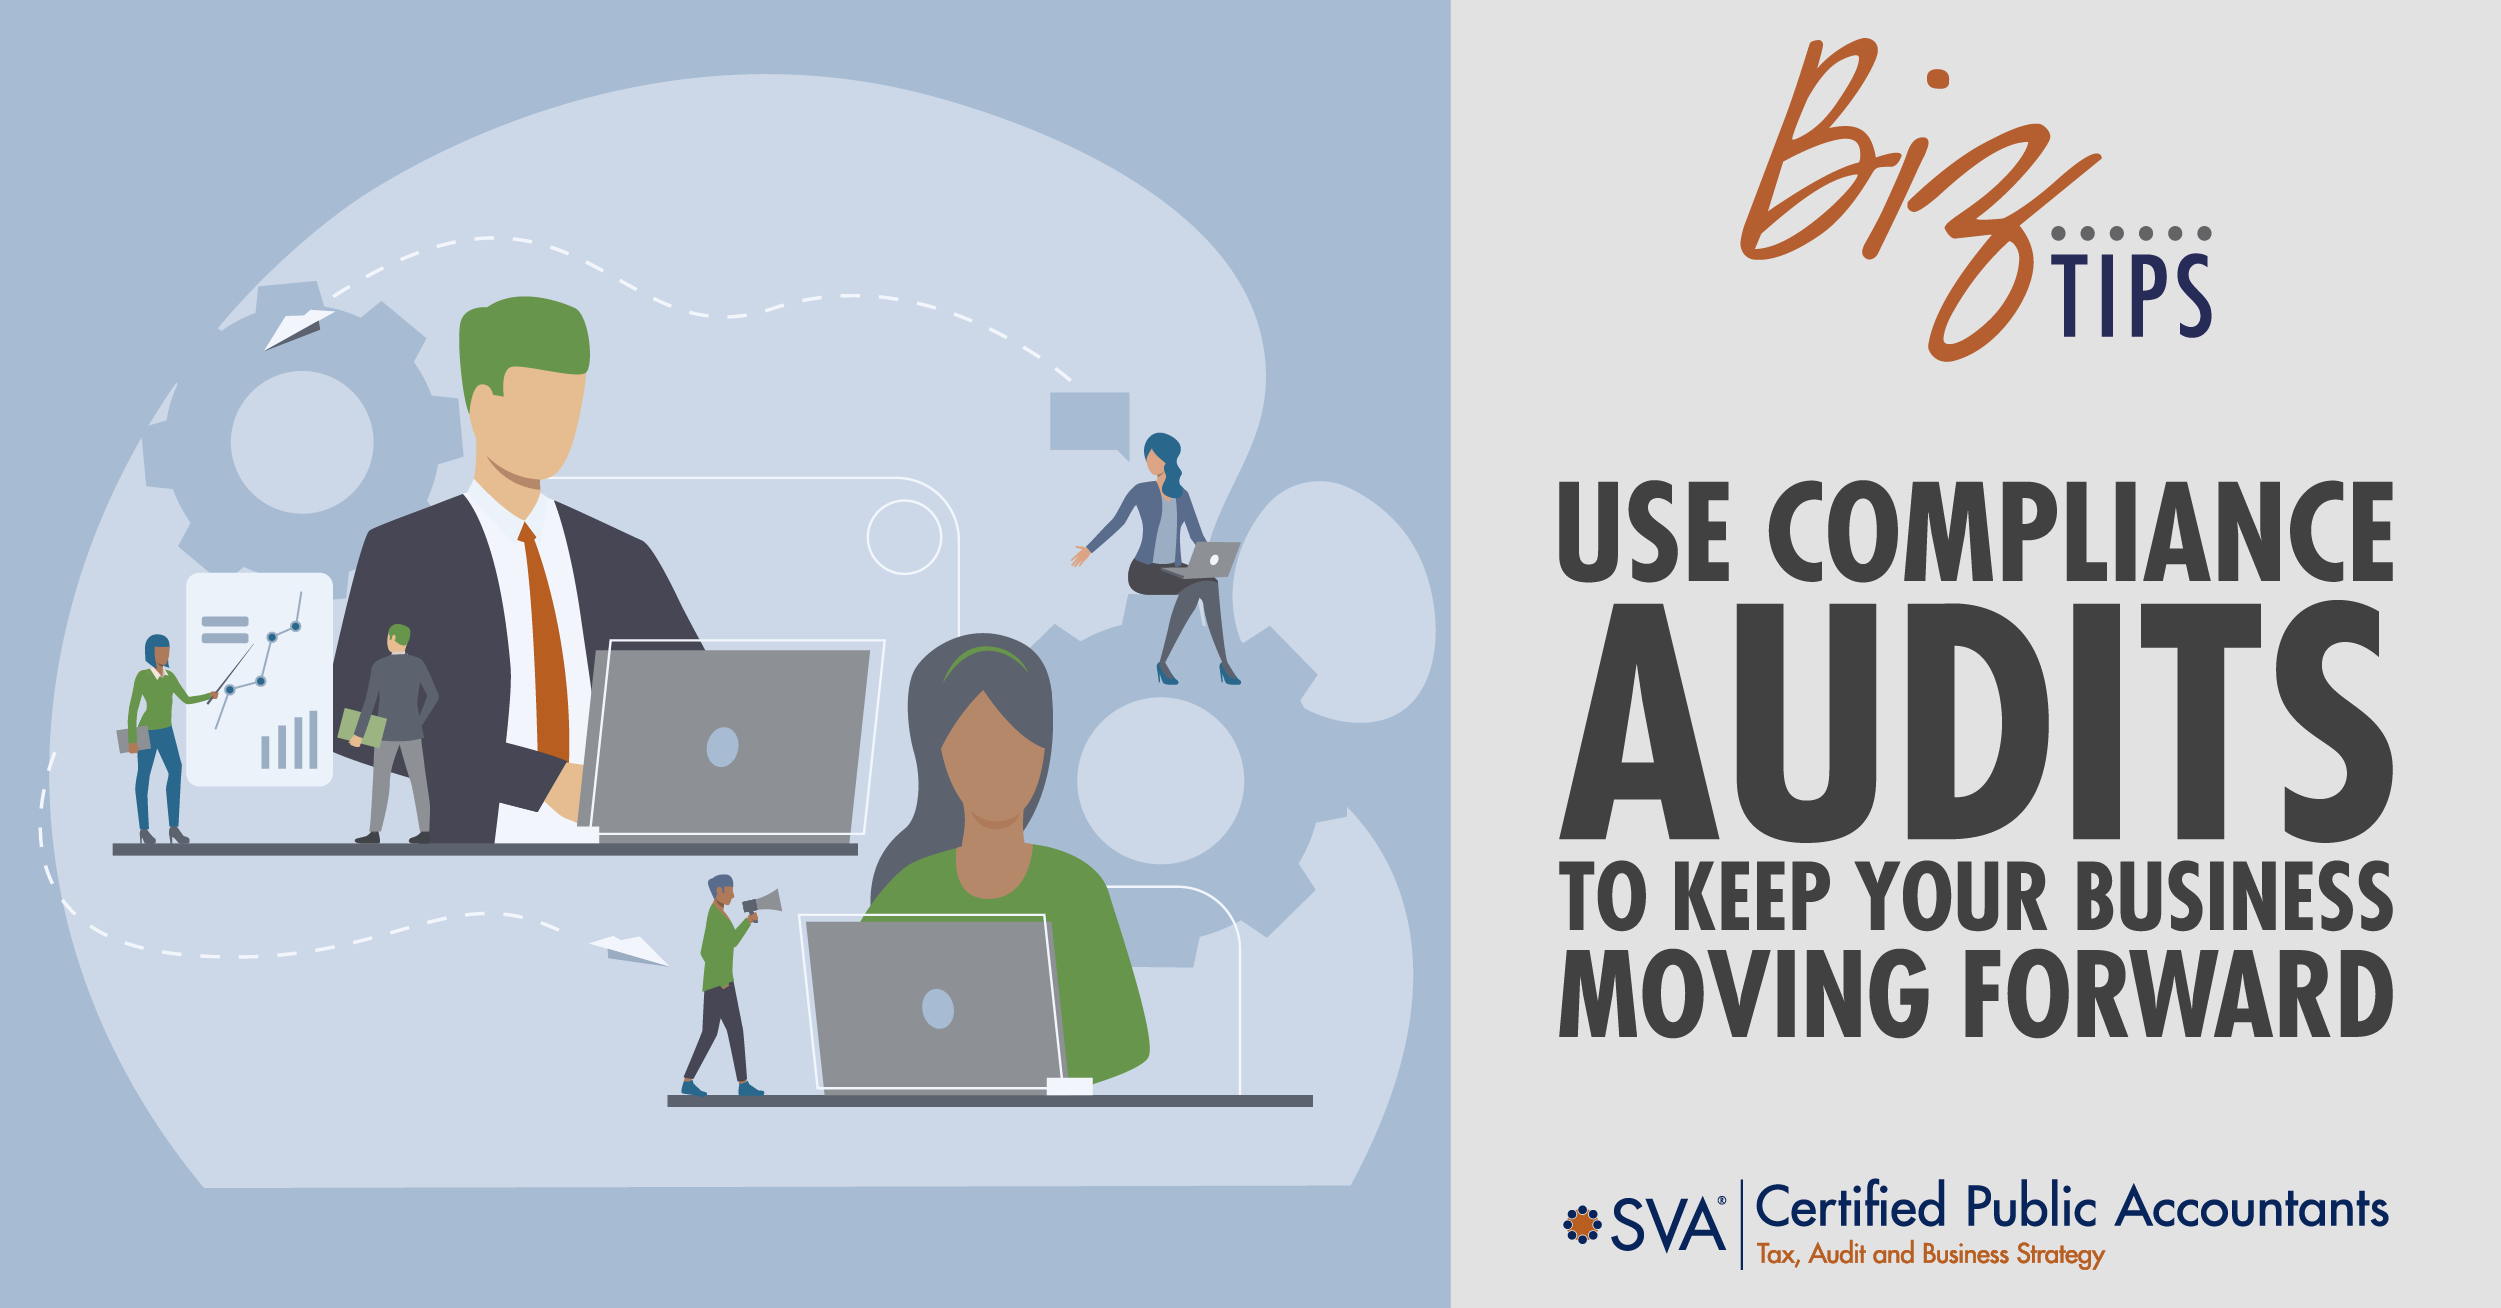 Use Compliance Audits to Keep Your Business Moving Forward